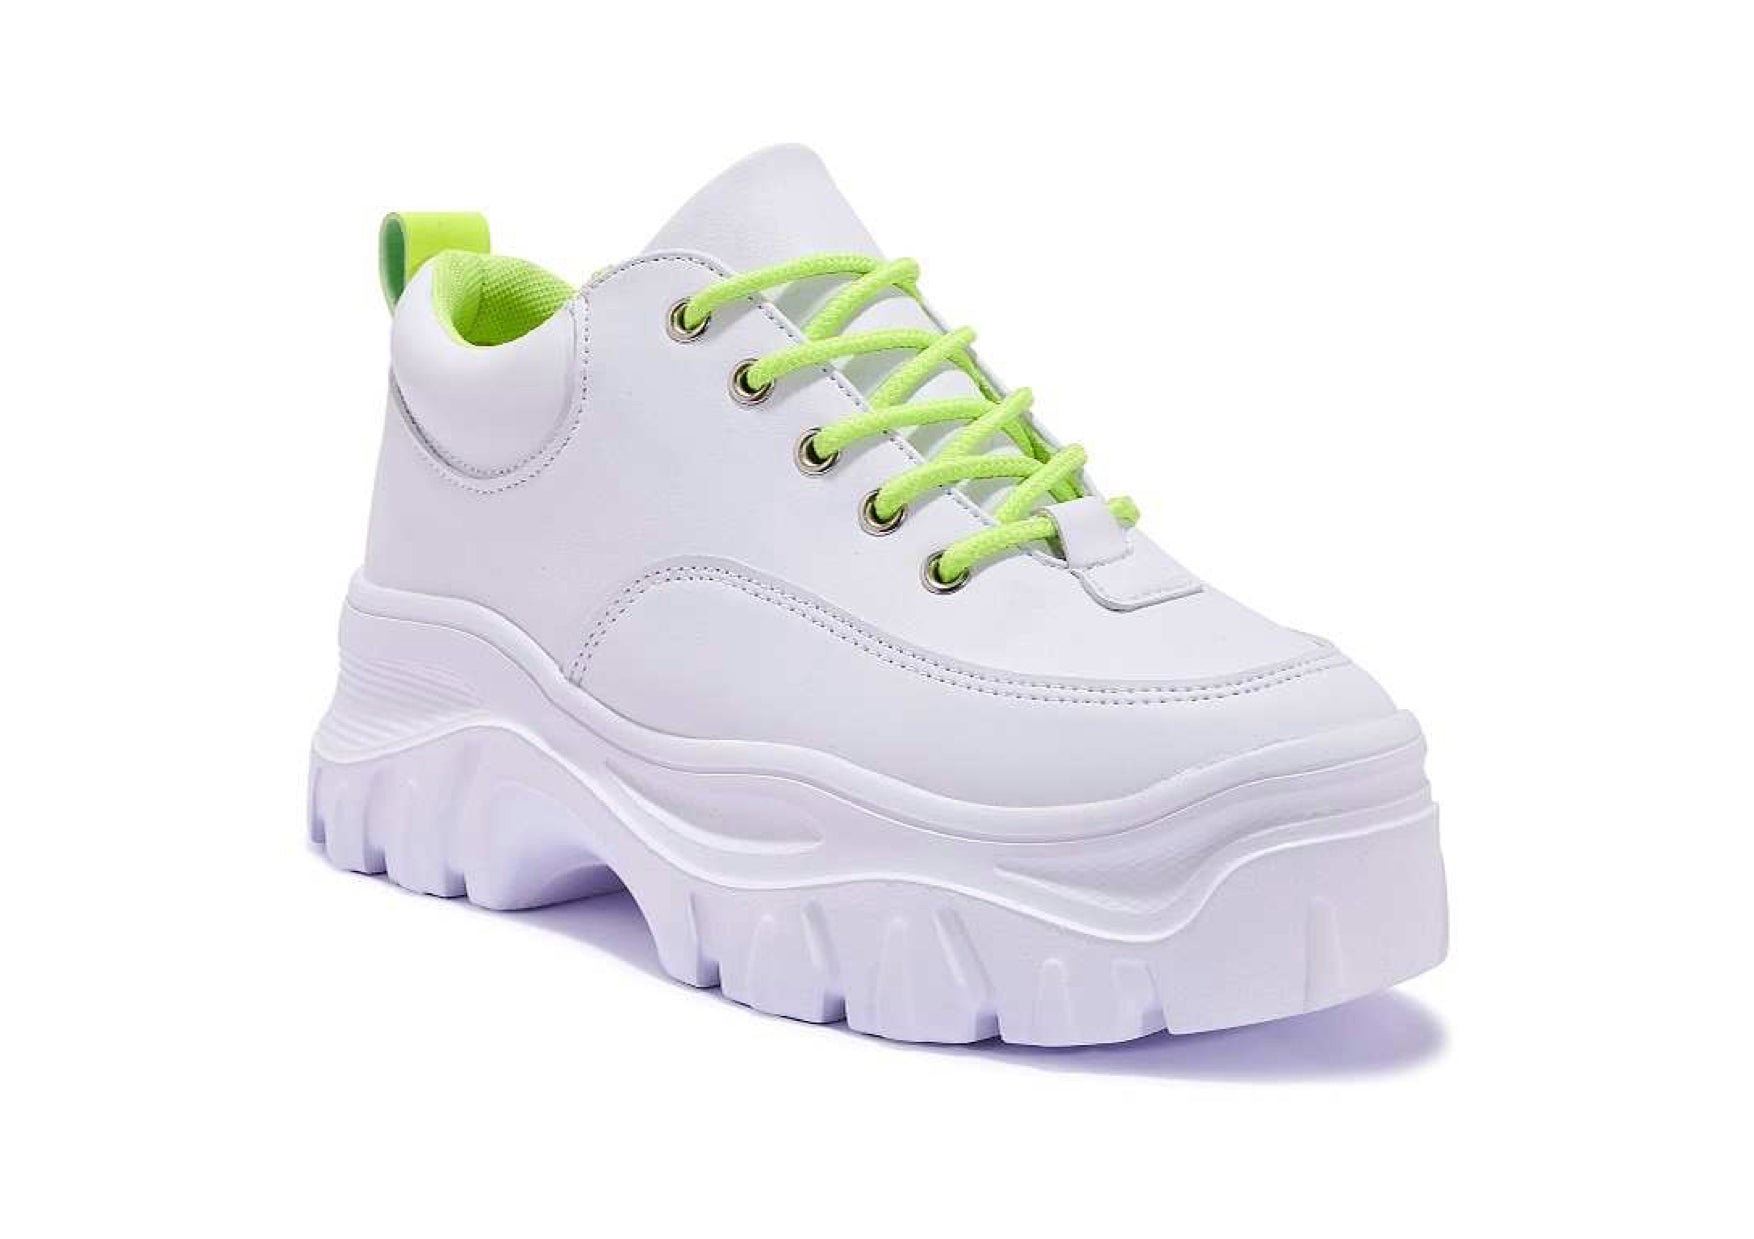 NEON LIME TRAINERS – Envy Shoes 